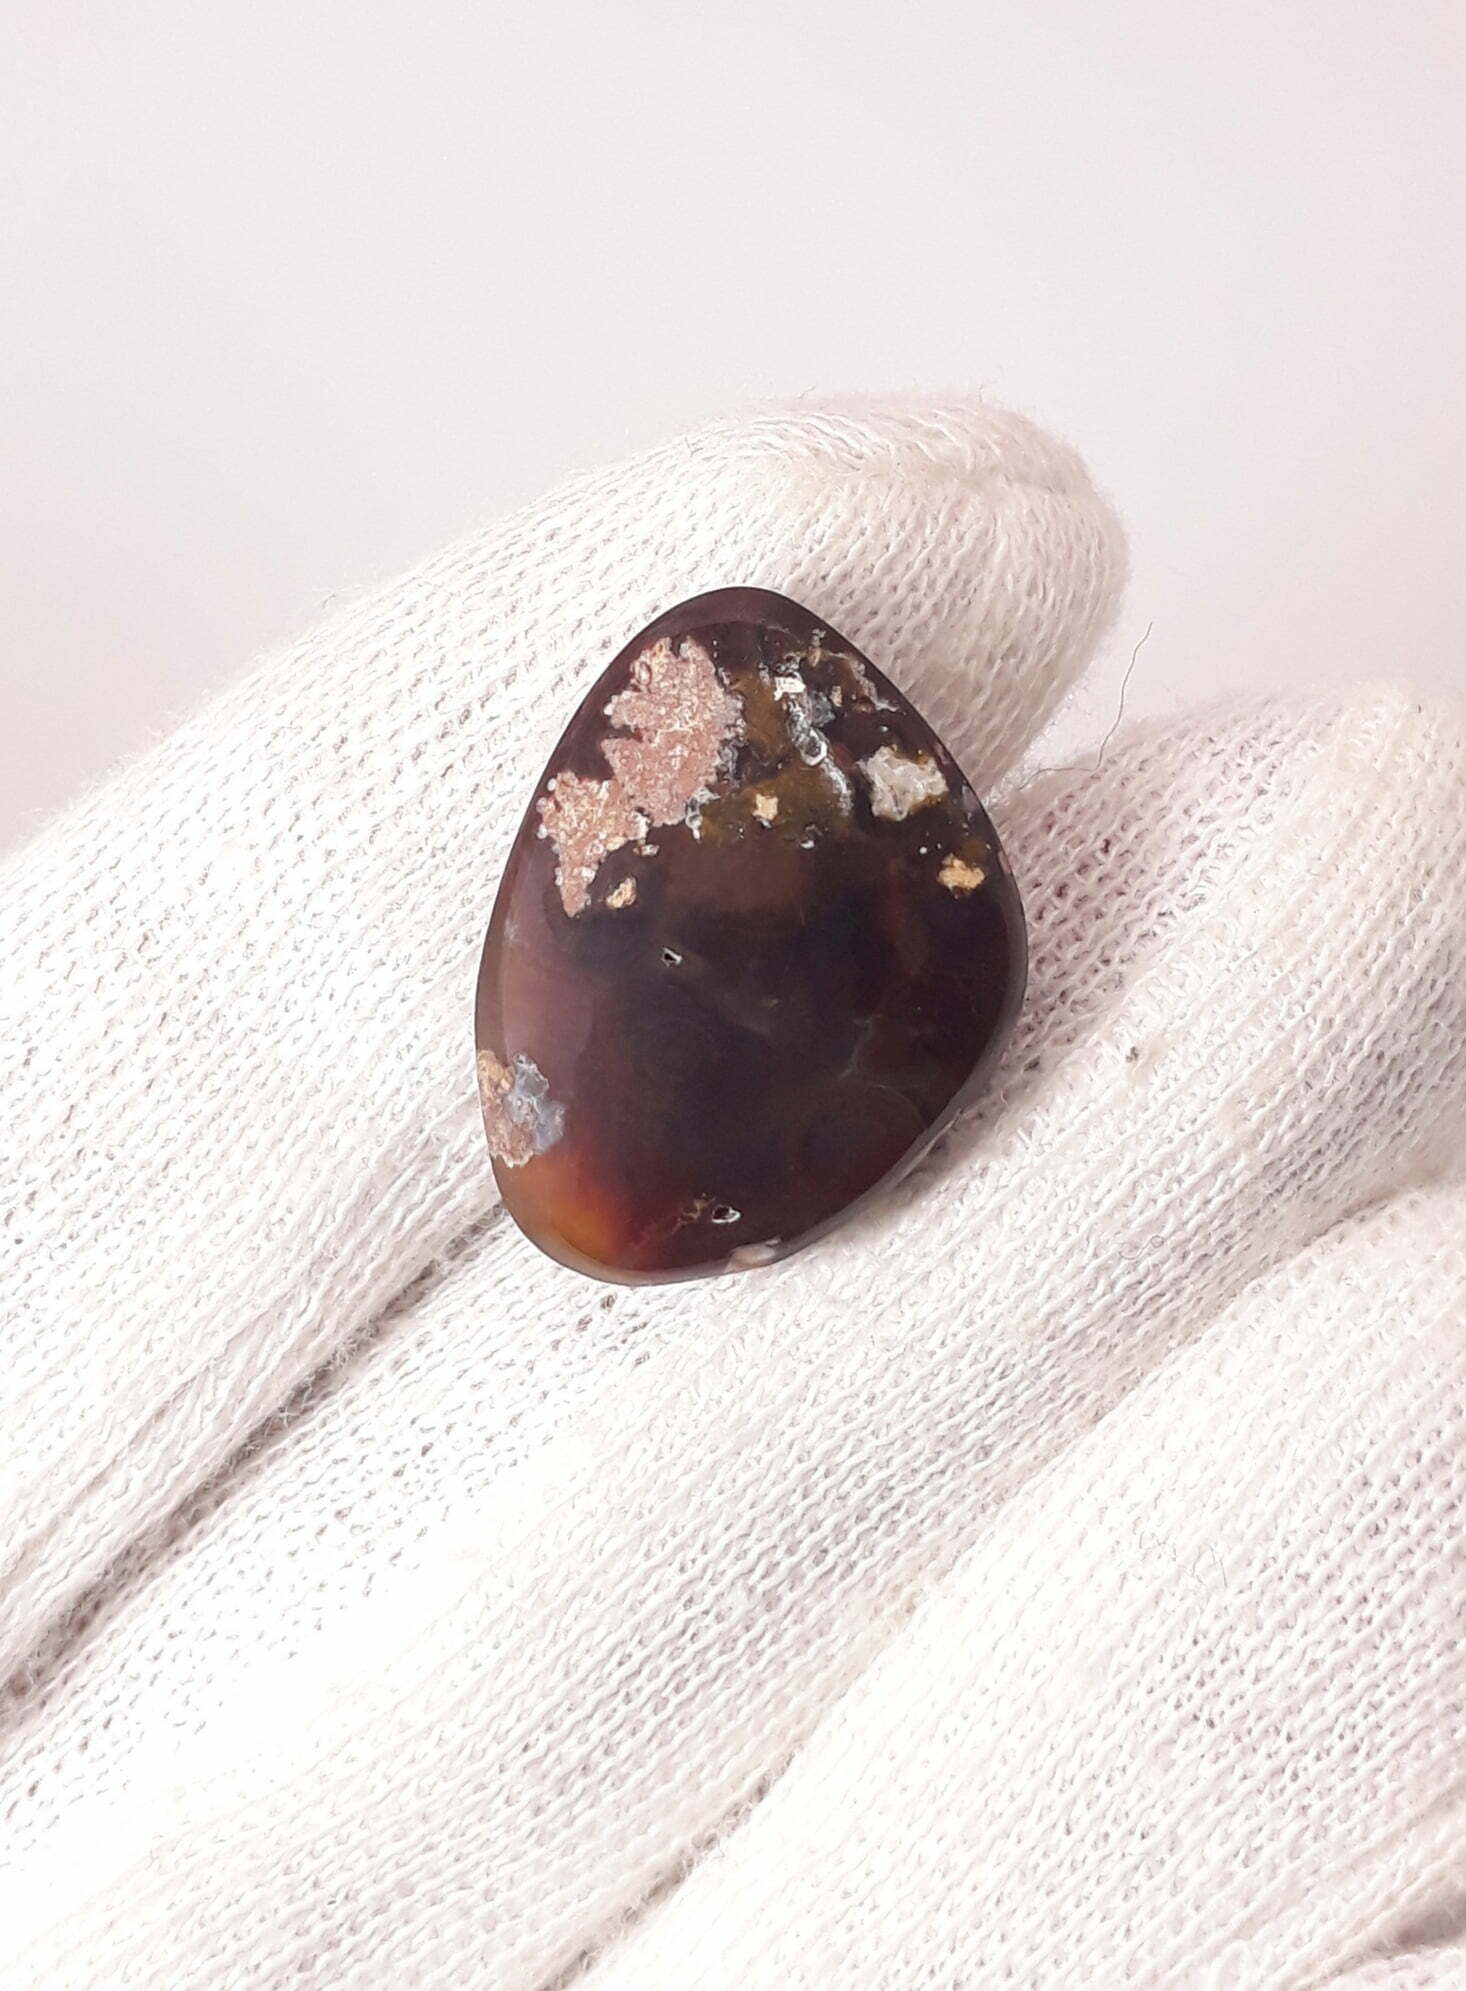 20ct Fire agate Loose cabochon - Rainbow Fire Agate - Mexican Fire Agate,  Rare Fire Agate - Rare Gemstone than Diamonds, Dimensions - 22x16.5mm